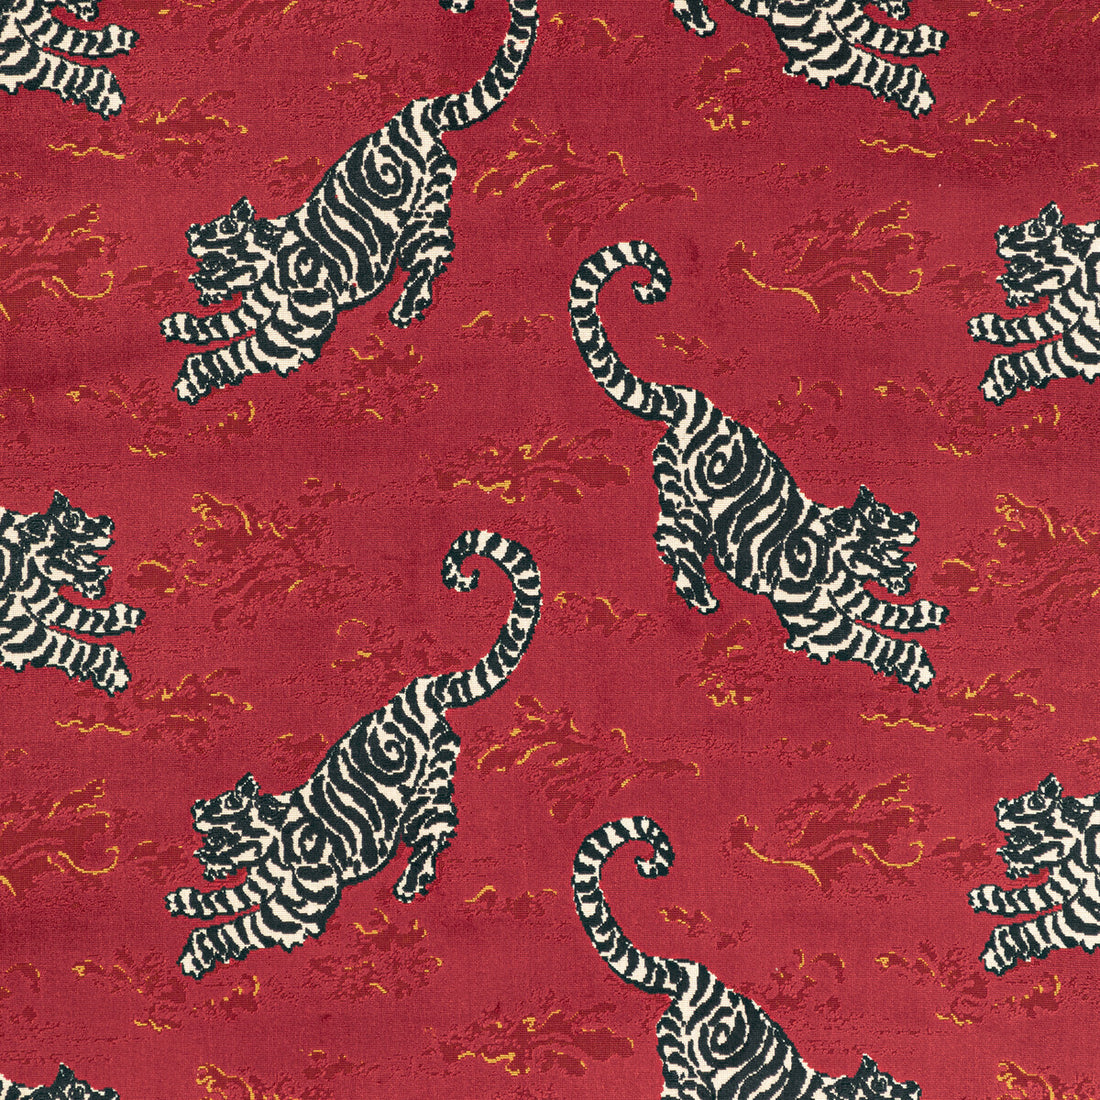 Bongol Velvet fabric in crimson color - pattern 2020200.198.0 - by Lee Jofa in the Mindoro collection